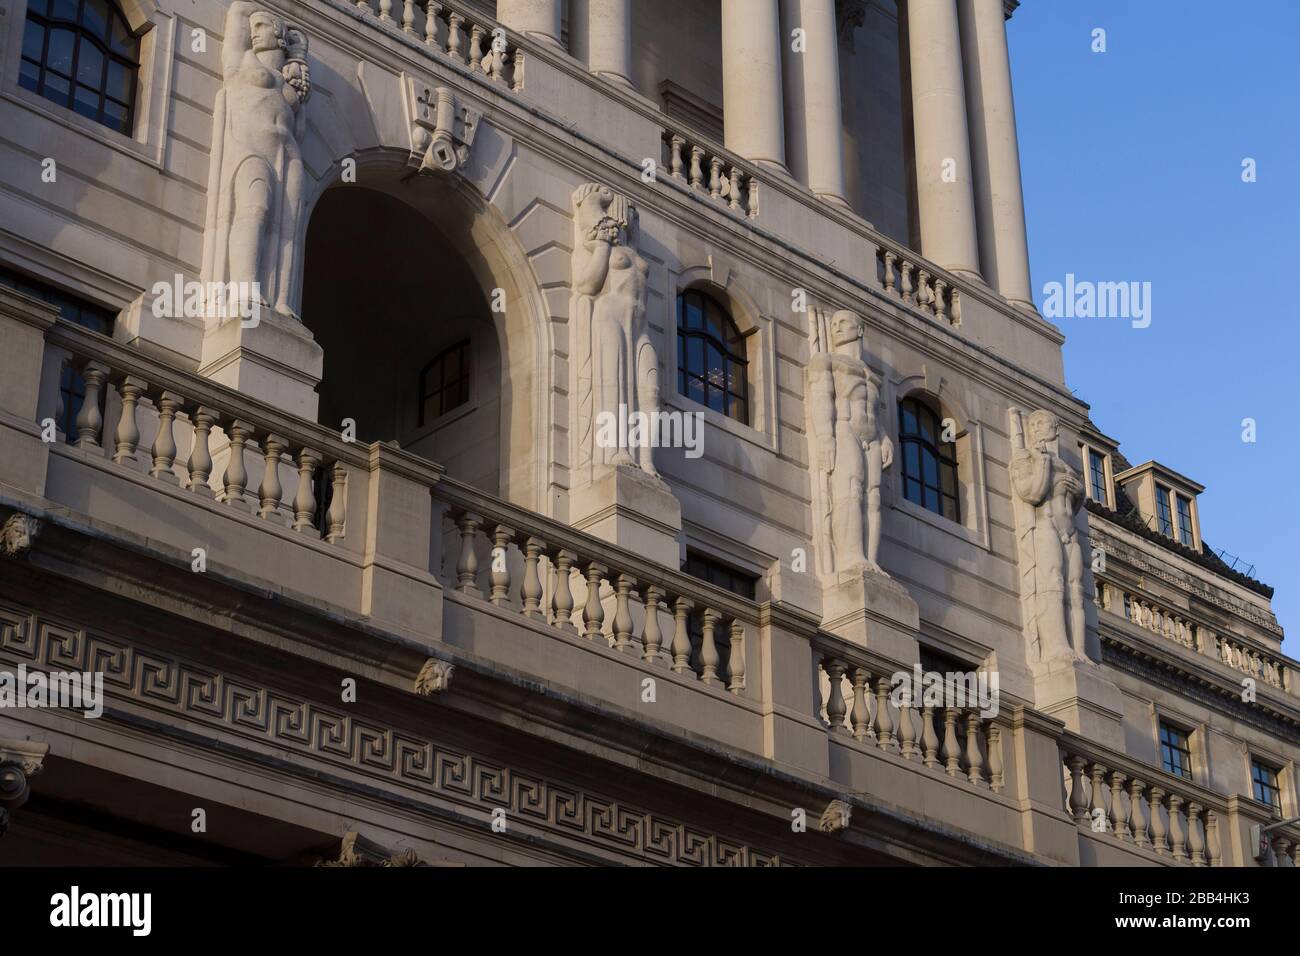 Bank of England is the central bank of the United Kingdom. Sometimes known as the Old Lady of Threadneedle Street. Threadneedle Street, London, UK.  T Stock Photo